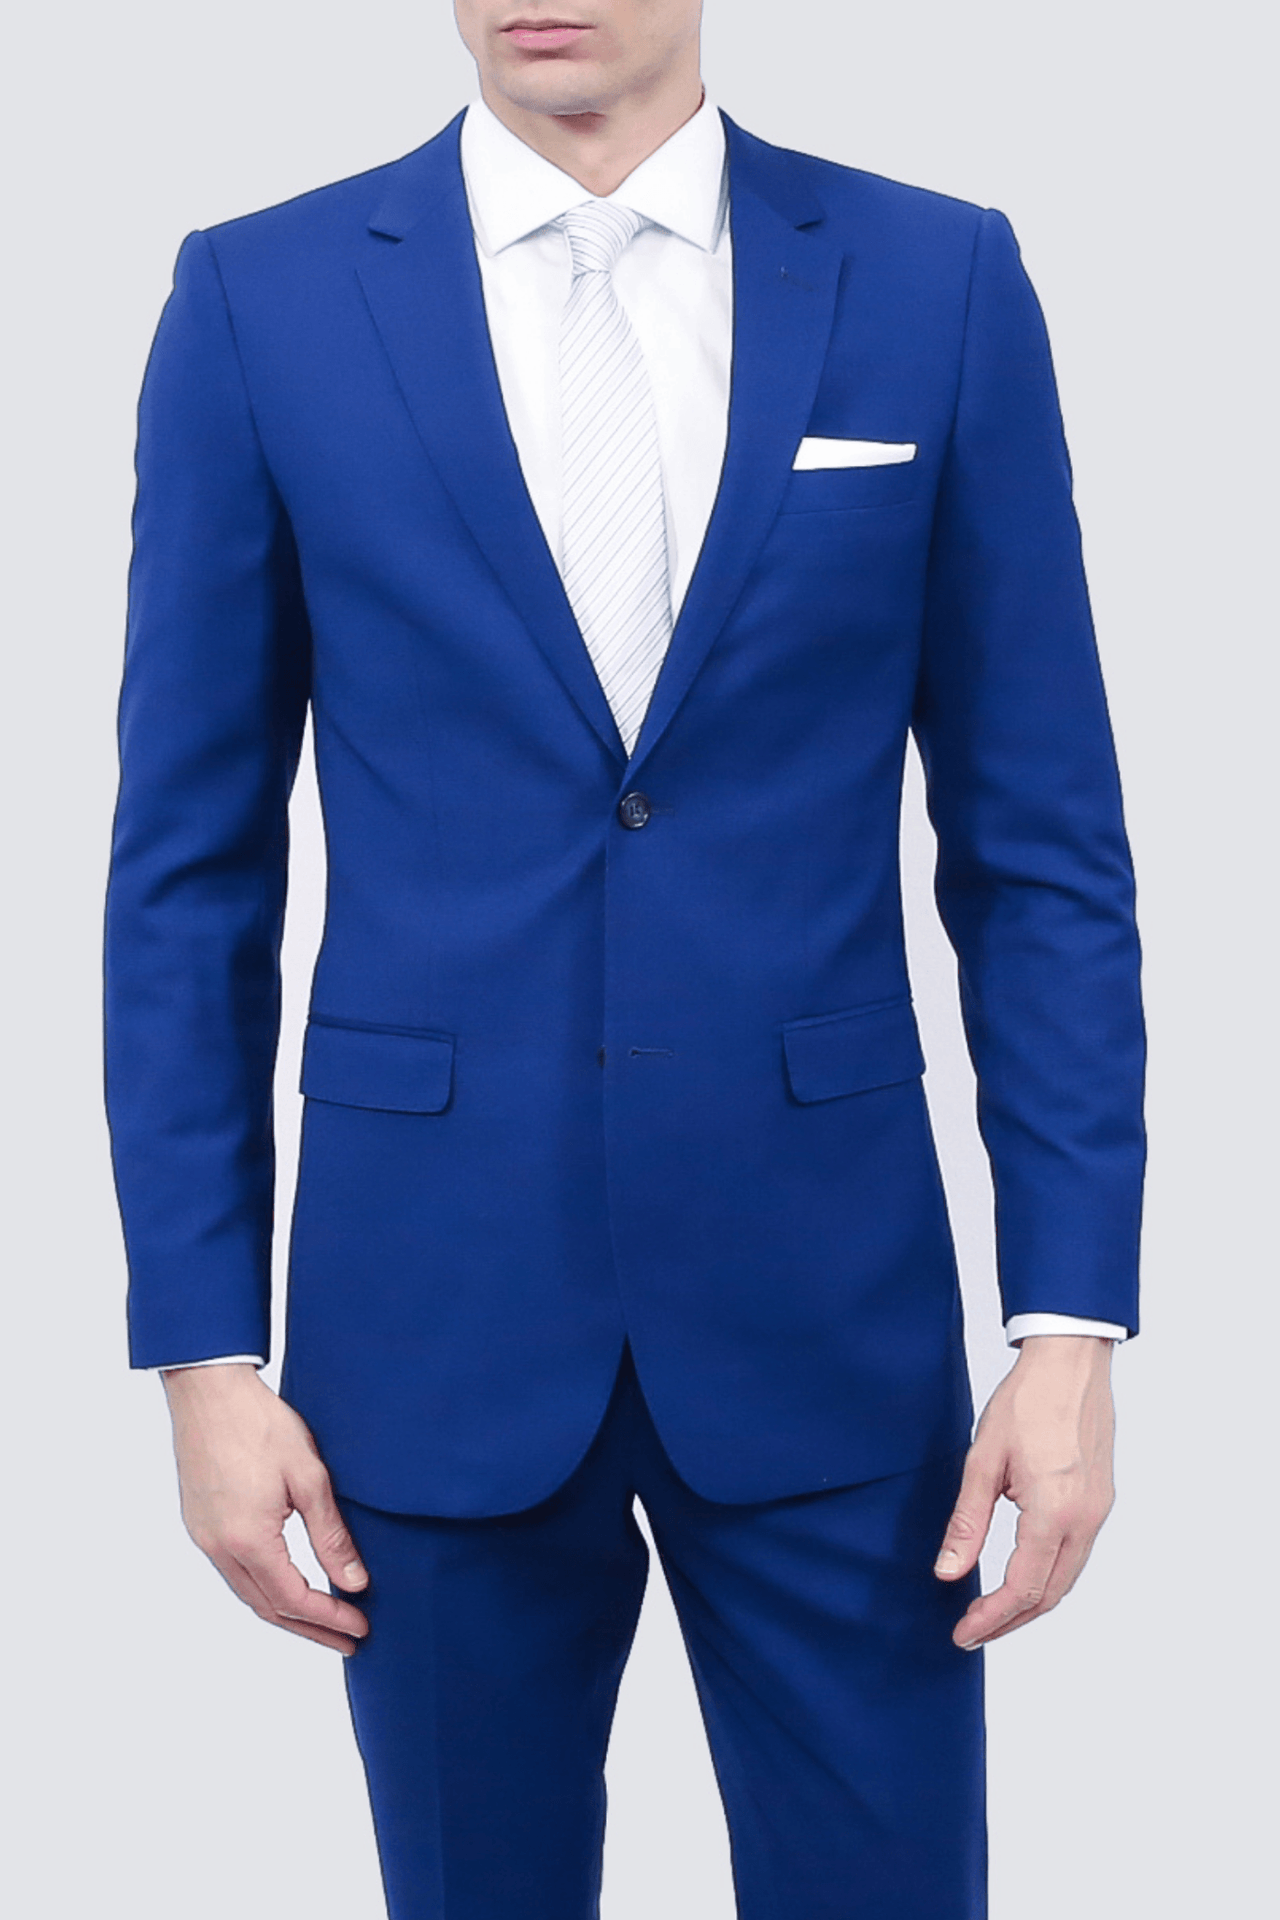 Tailor's Stretch Blend Suit | French Blue Modern or Slim Fit - Tomasso Black